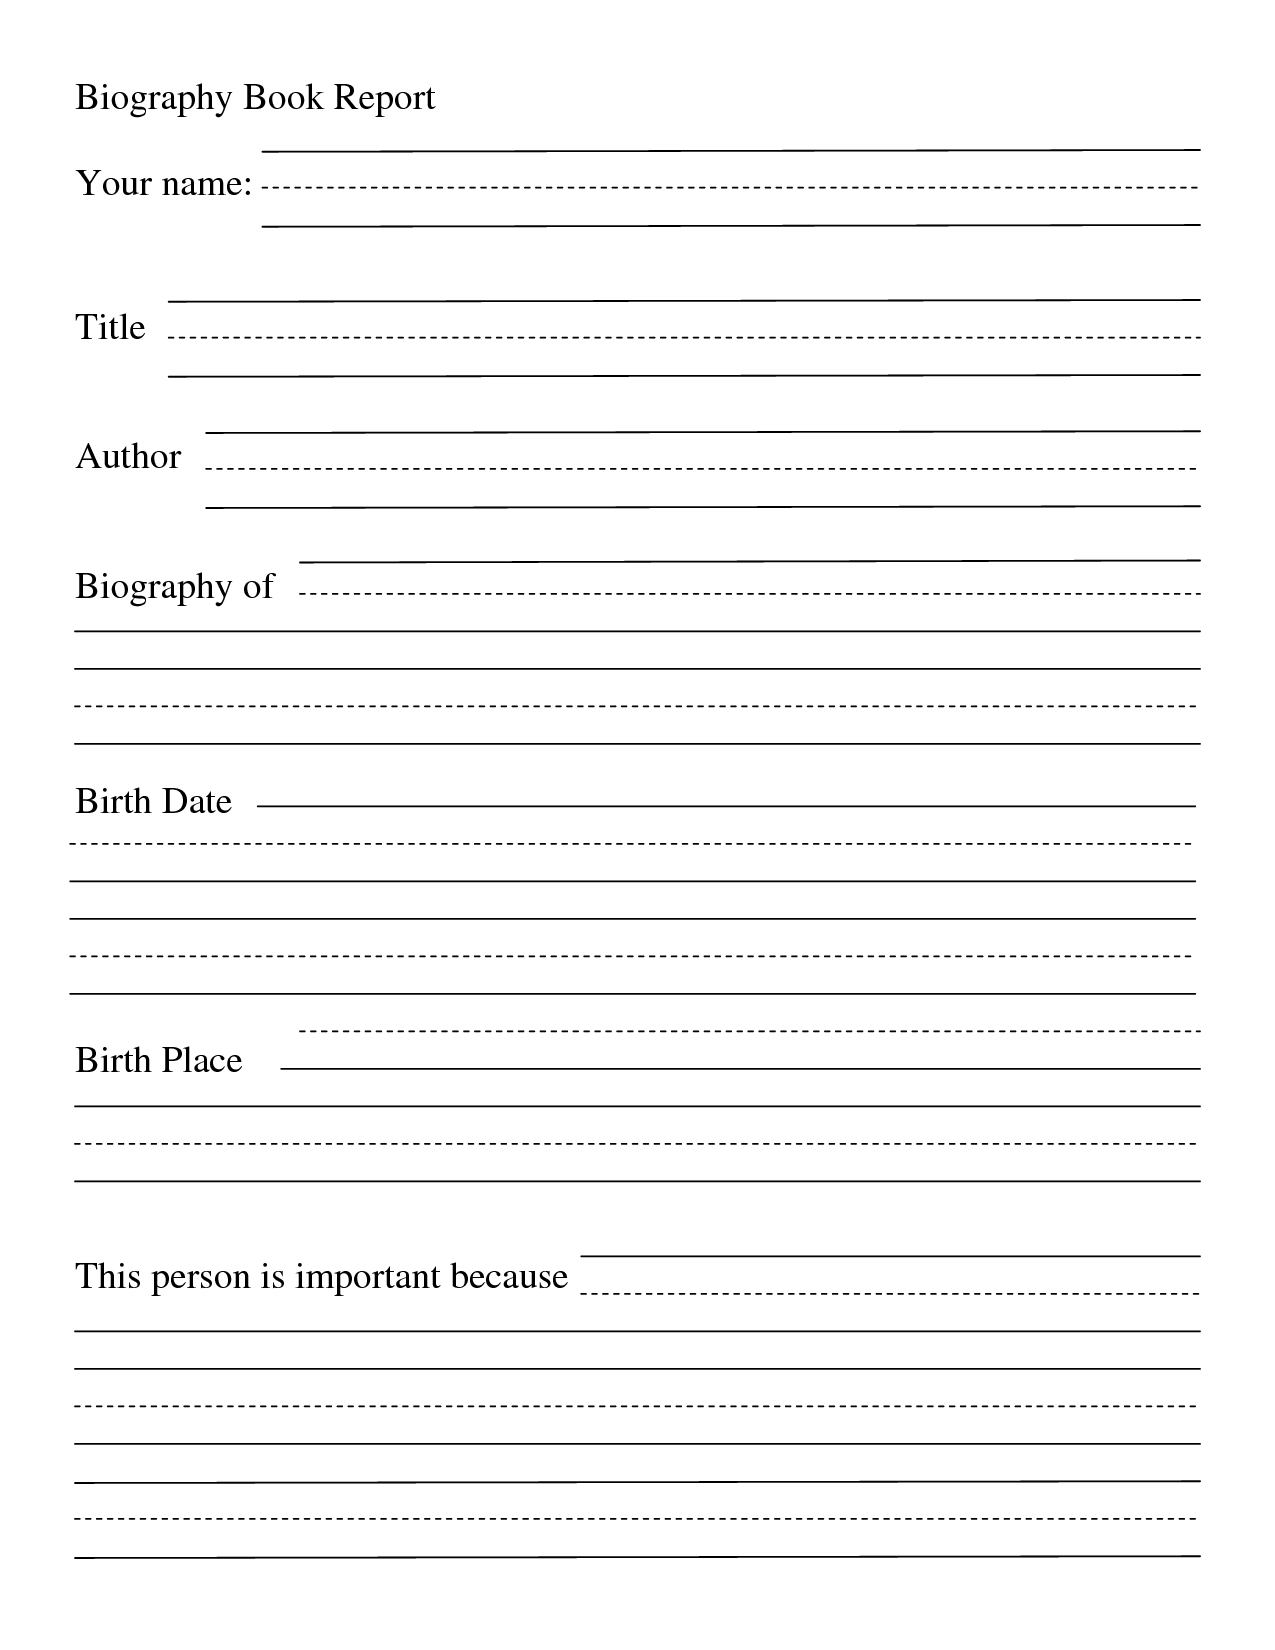 Biography Outline Worksheet | Printable Worksheets And Throughout Biography Book Report Template